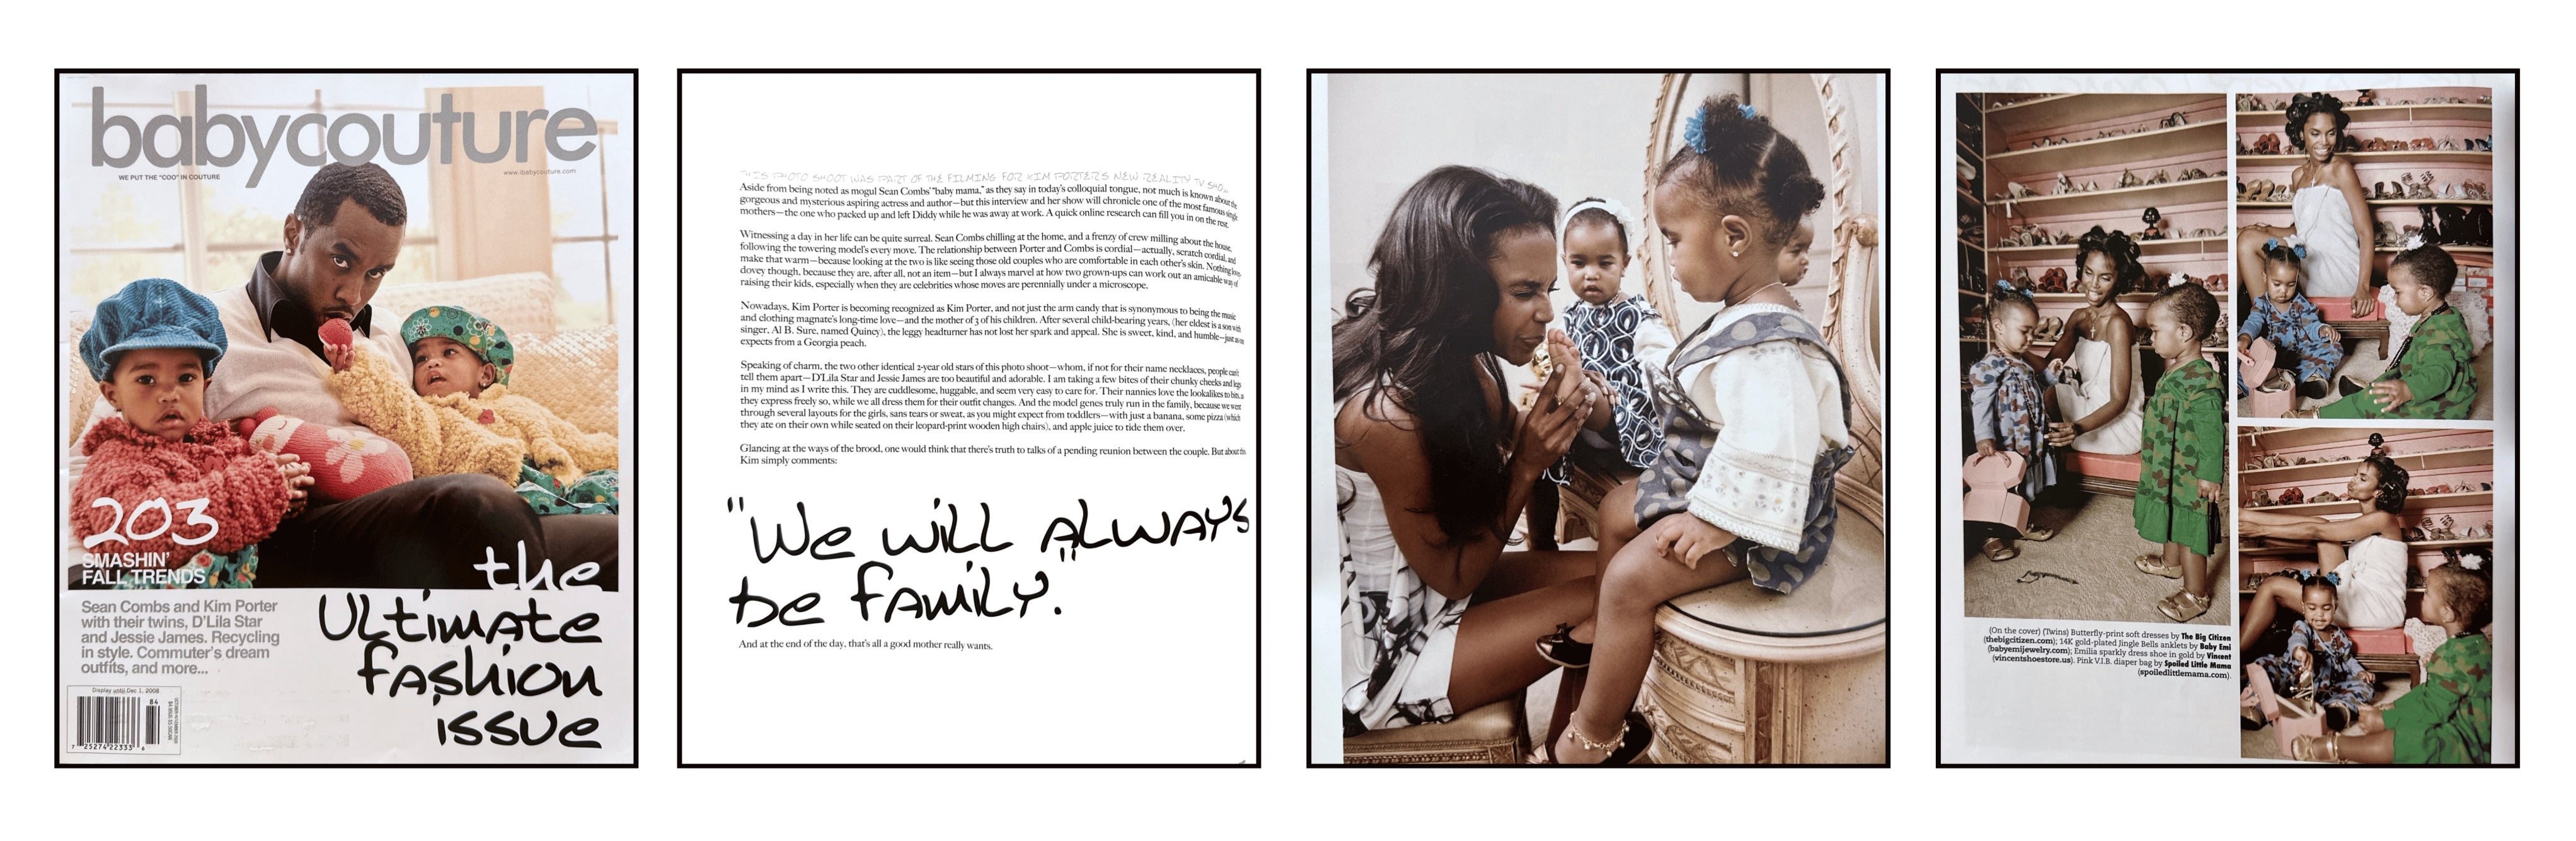 Sean Combs and late Kim Porter in Baby Couture Magazine with their twin girls who are wearing our 14K Gold Plate Jingle Bell Anklets.